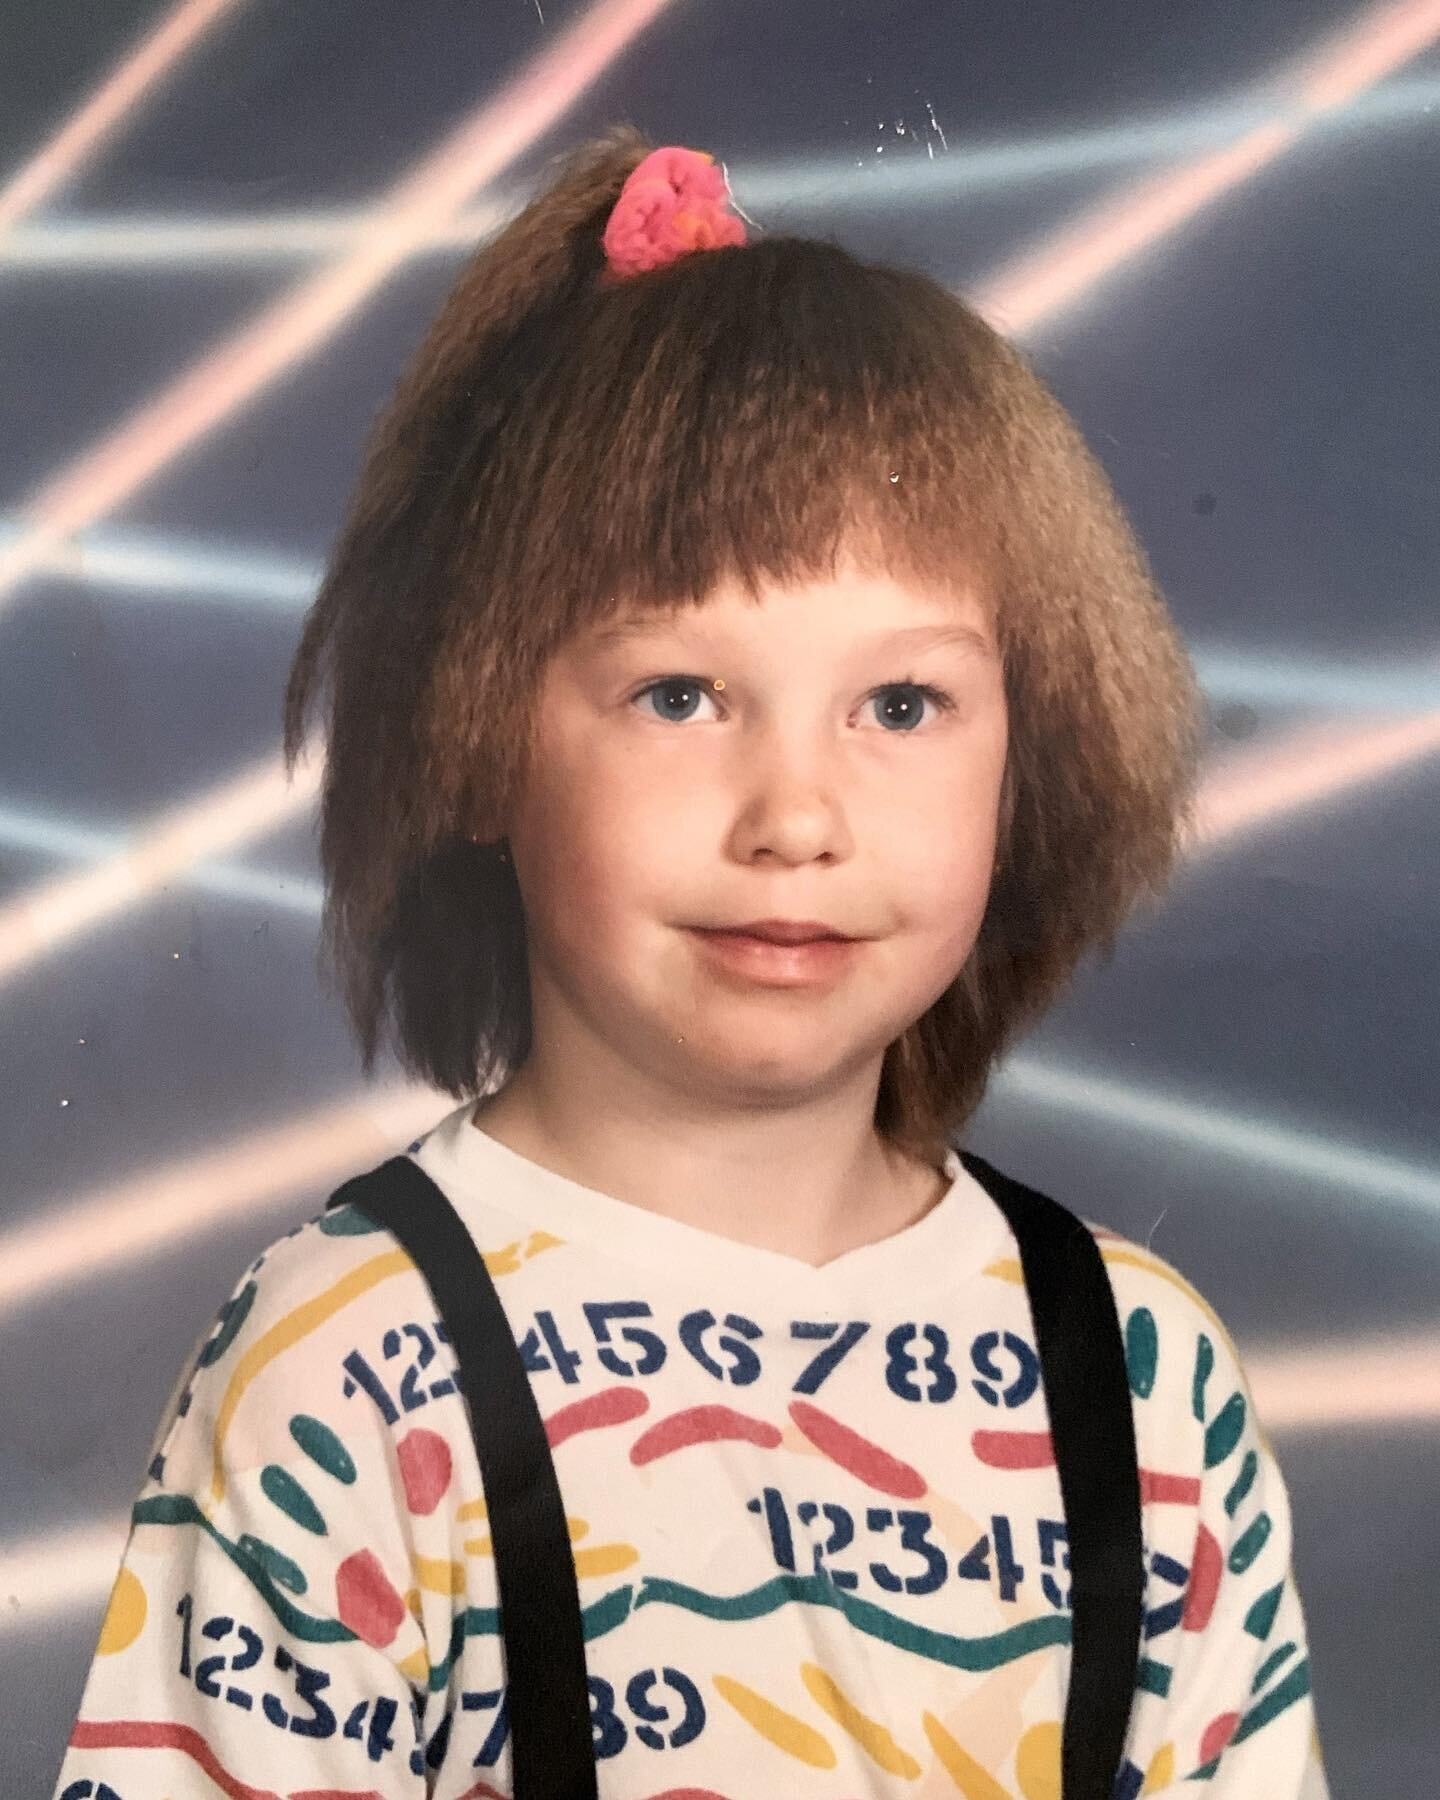 A big shout out to this gem today. Meghan Topjian, office coordinator, who we are so grateful for everyday! We could not do what we do without her. The crimped hair and laser beams are just added bonuses. We ❤️ u Meghan!